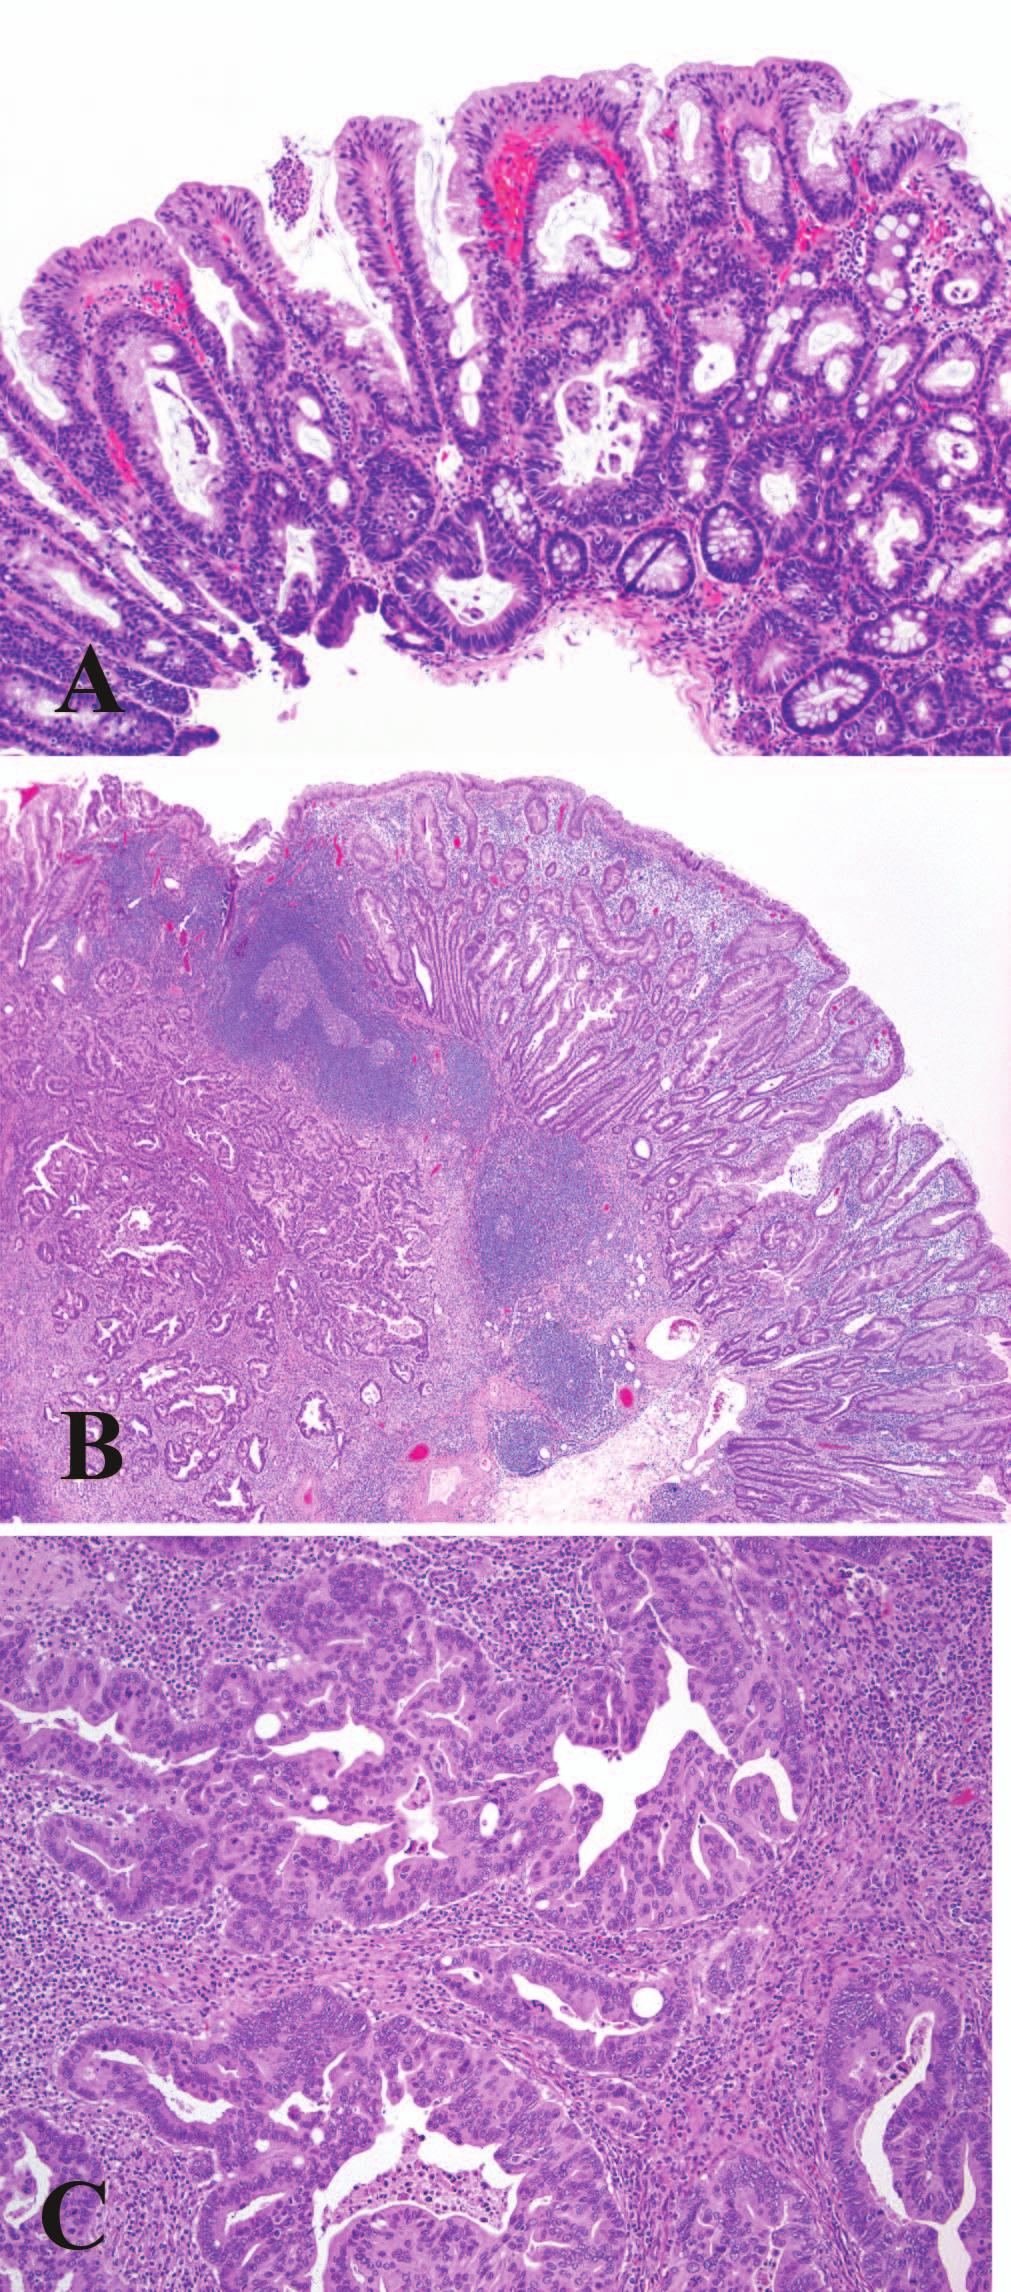 Figure 3. A, A sessile serrated adenoma/polyp (SSA/P) with cytologic dysplasia; some of the dysplastic crypts have serrations. B, Invasive adenocarcinoma arising in an SSA/P with cytologic dysplasia.